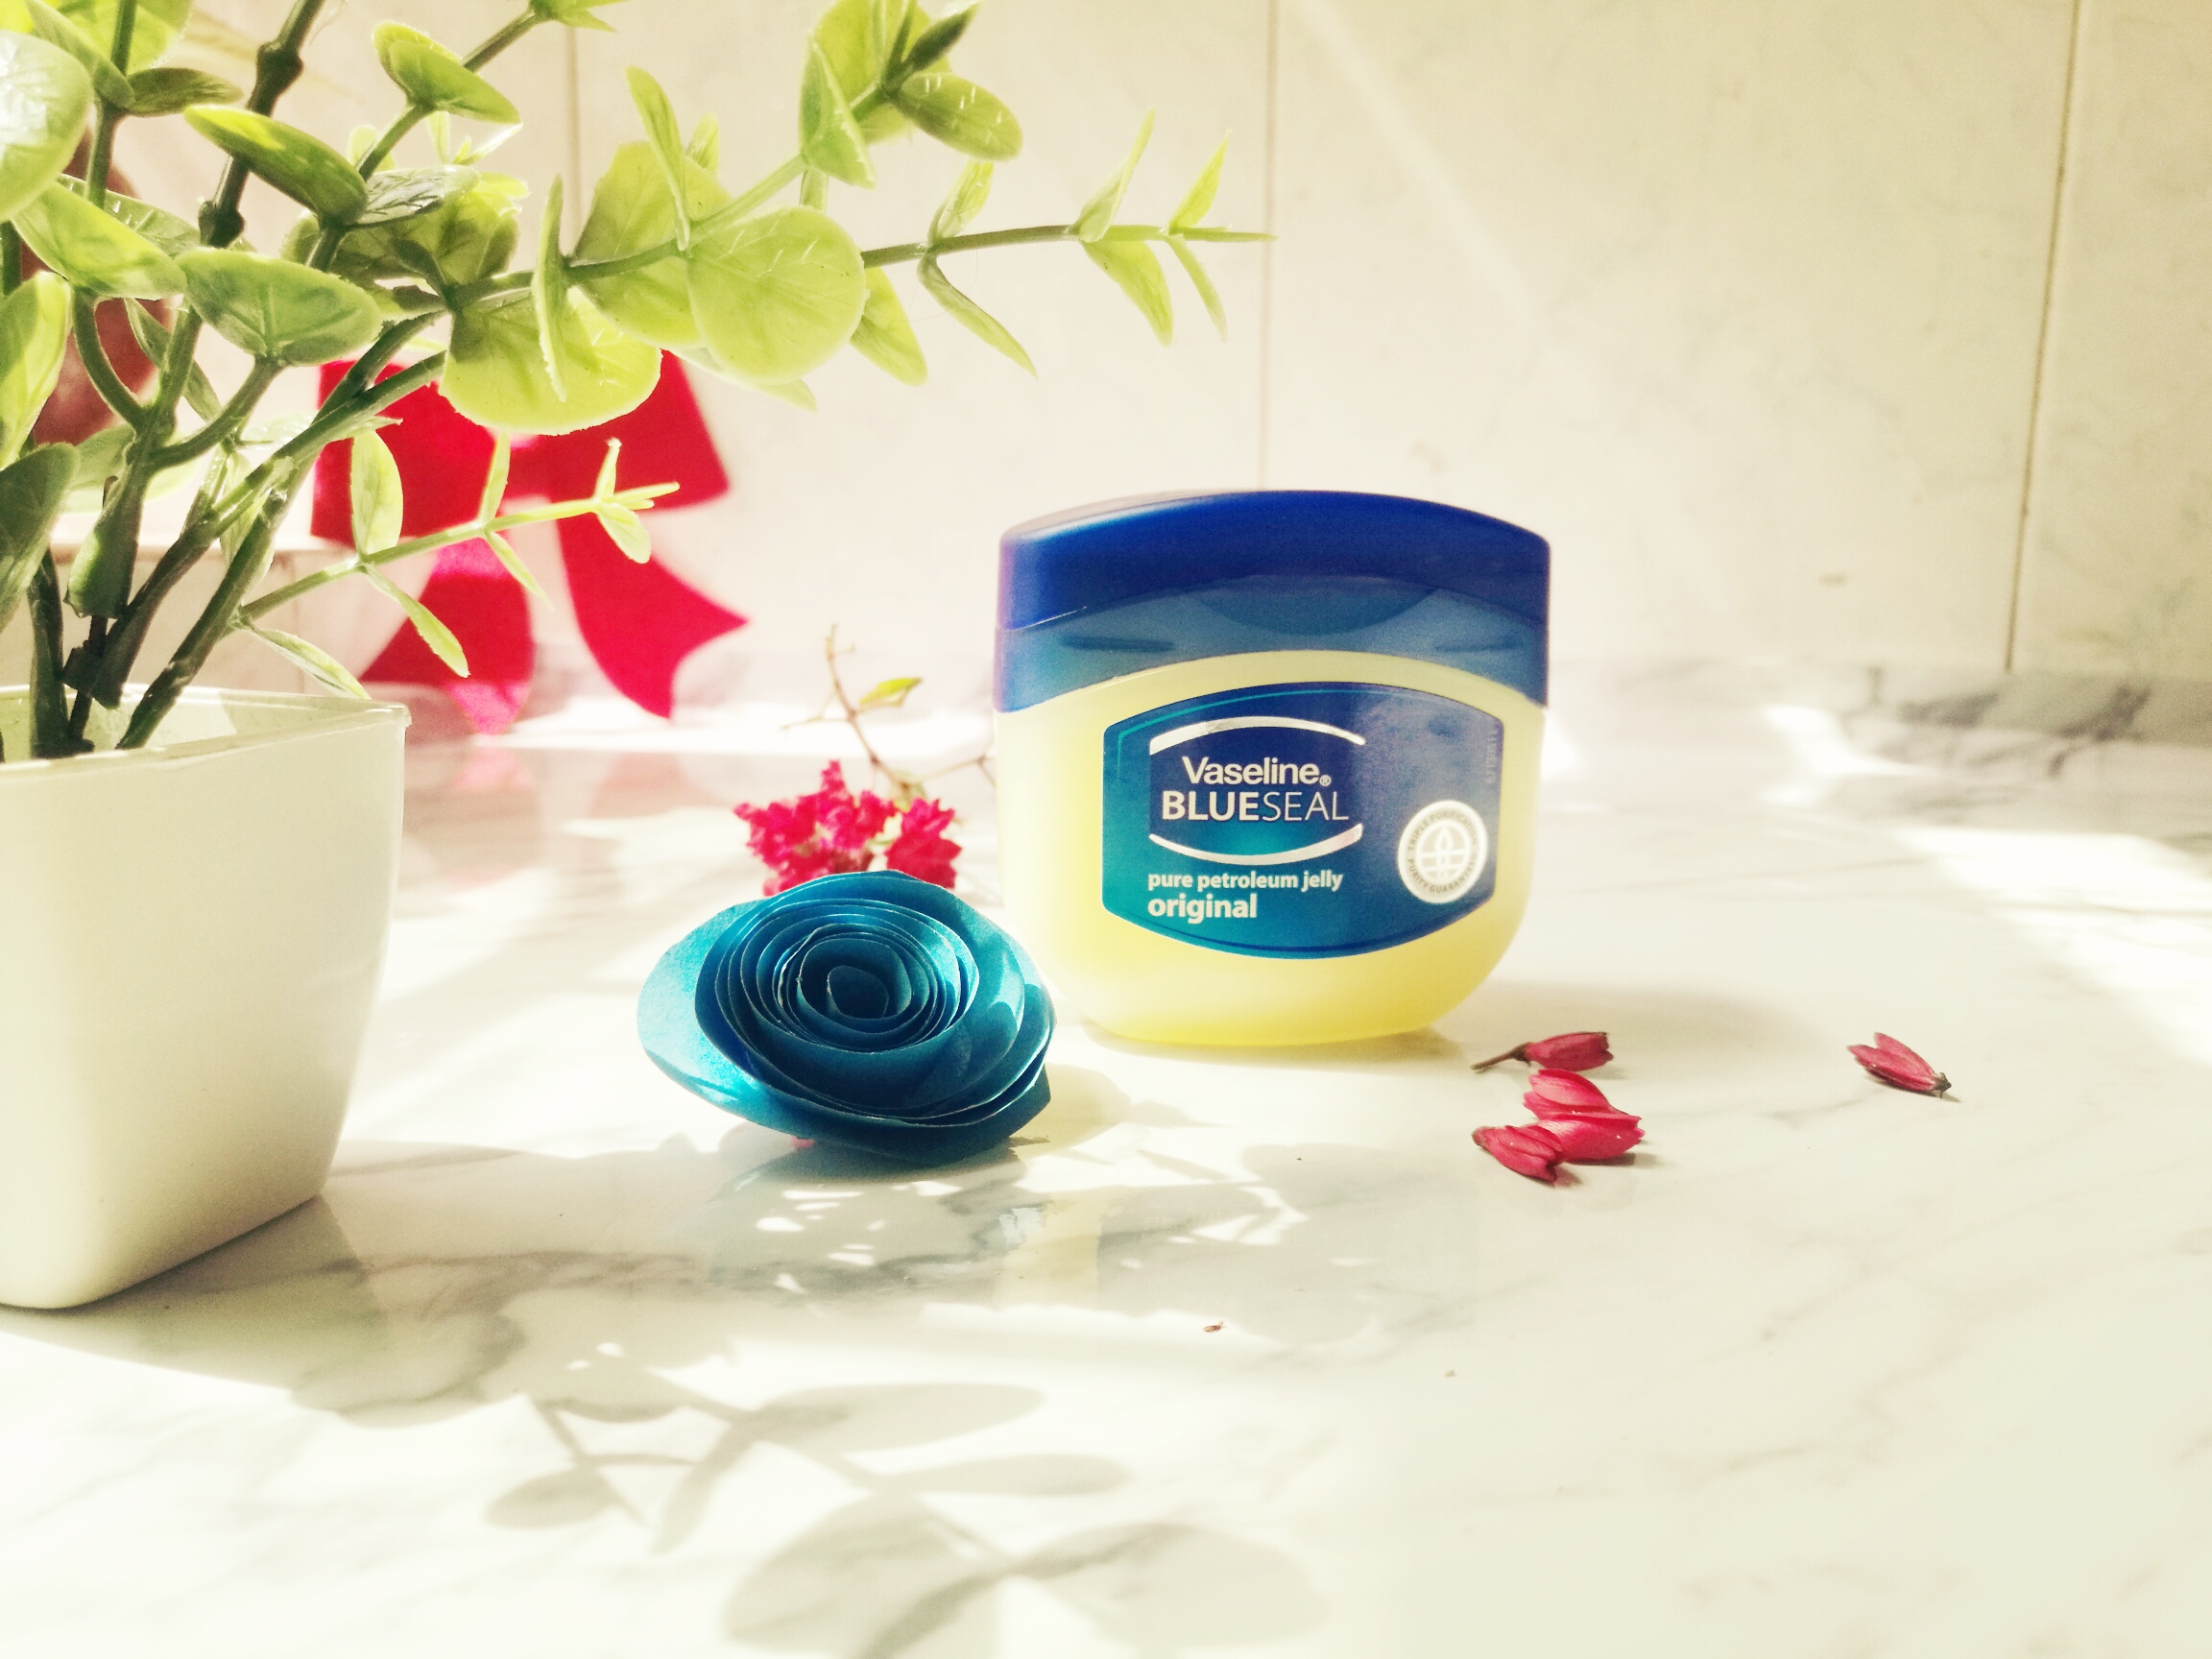 Vaseline Blueseal Review: My Slugging Experience With It